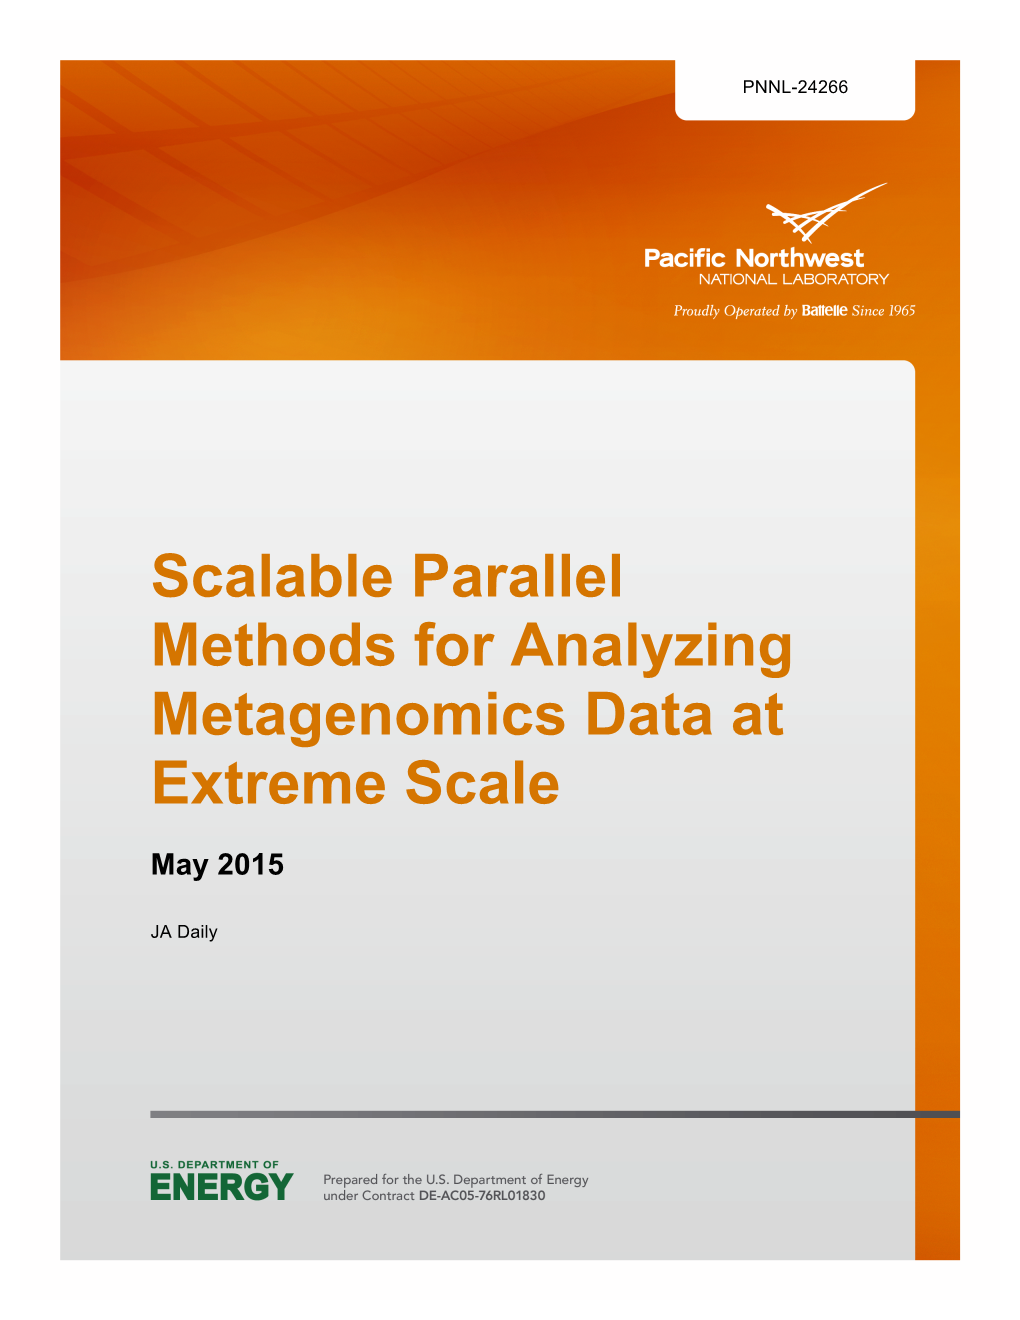 Scalable Parallel Methods for Analyzing Metagenomics Data at Extreme Scale